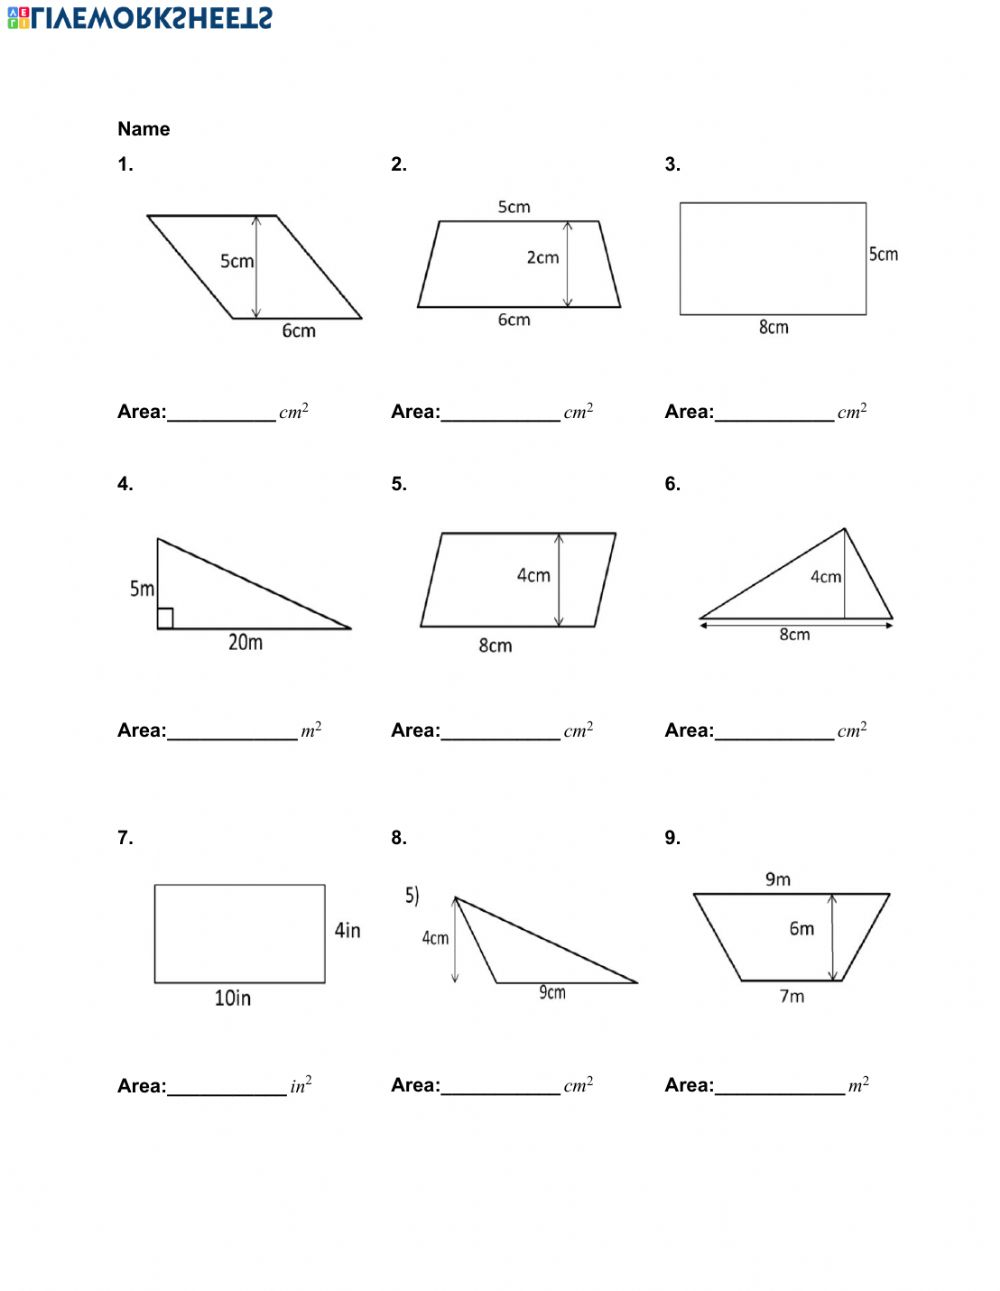 Area Of Quadrilaterals And Triangles Worksheet